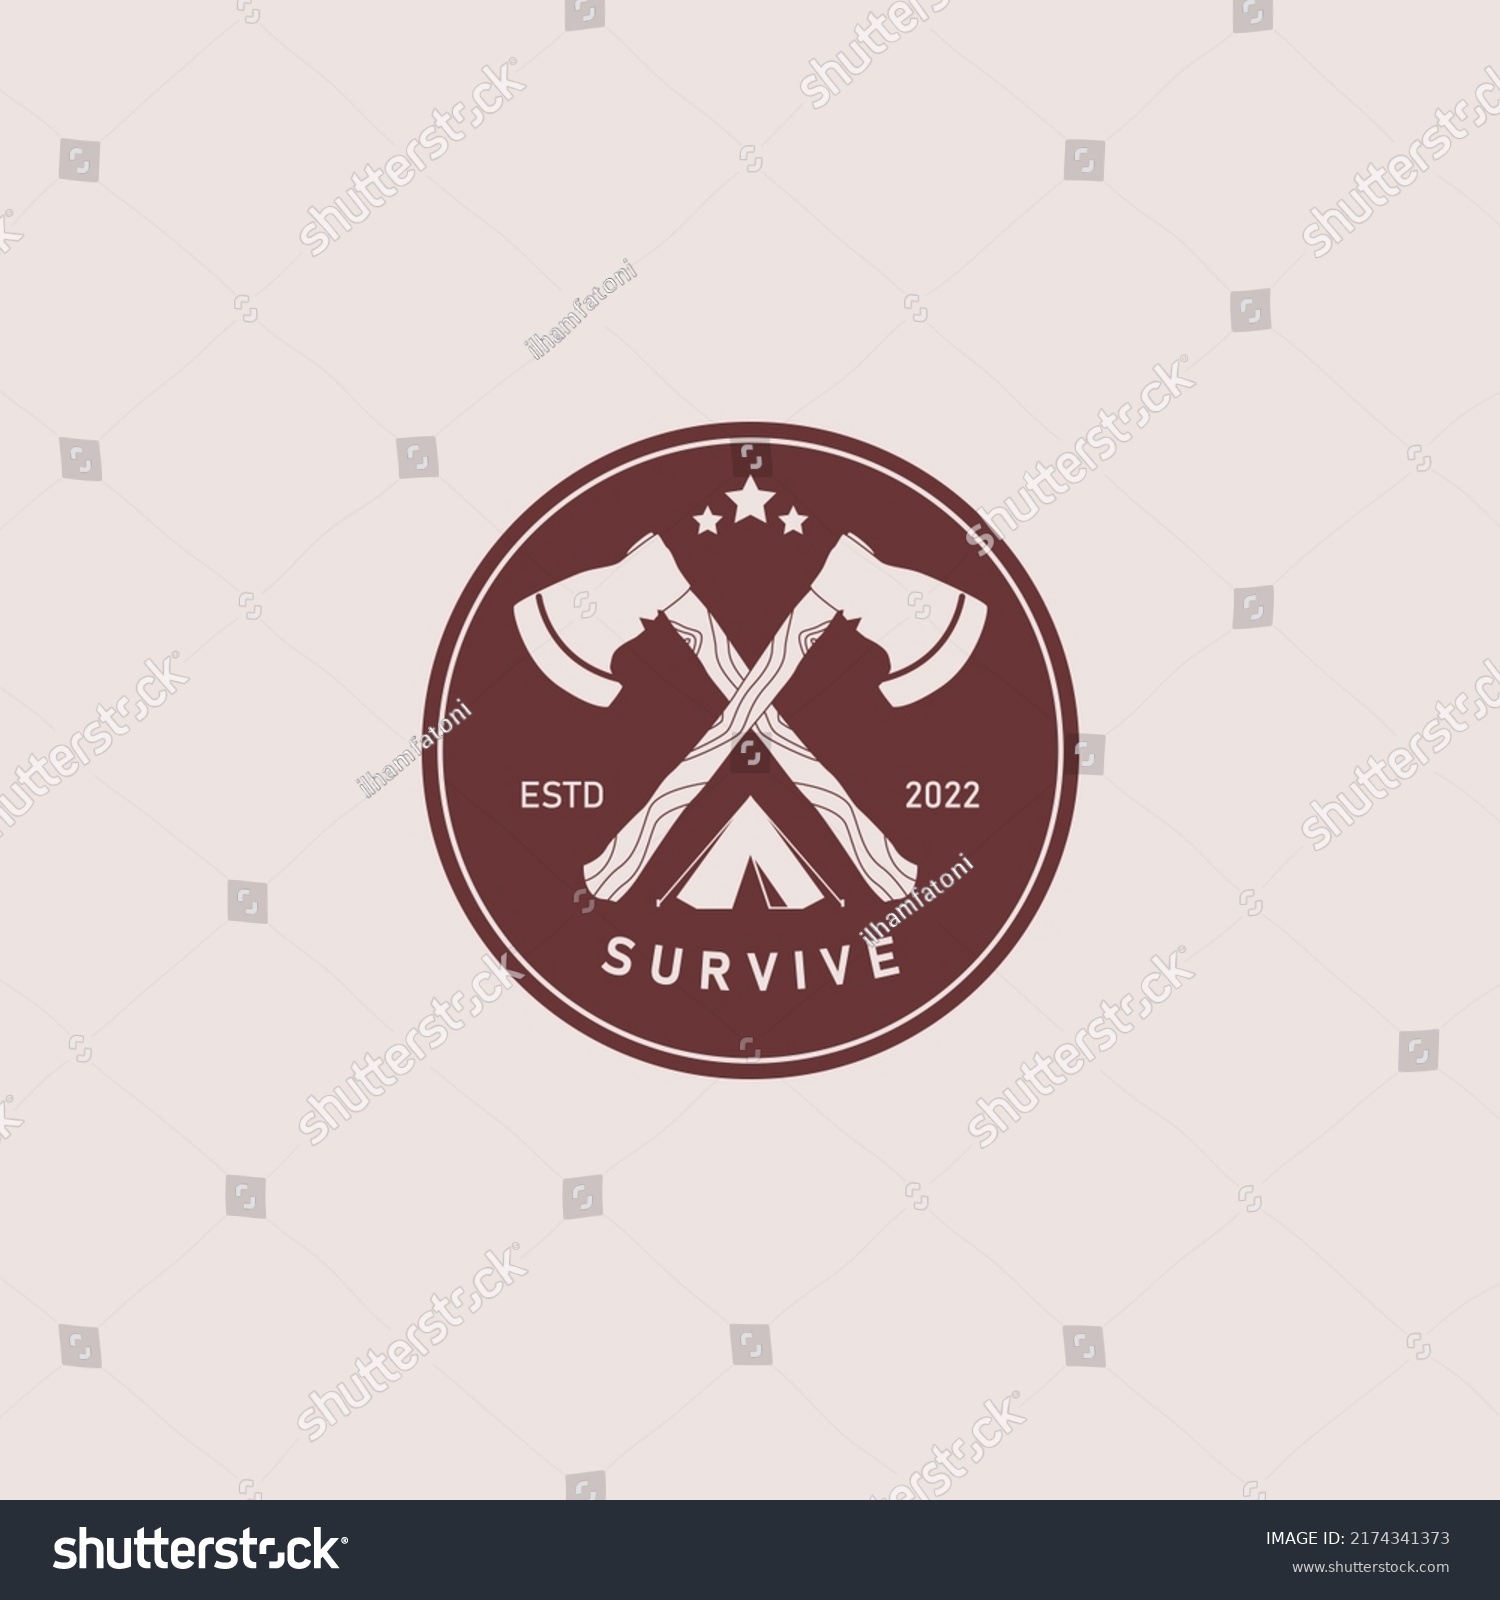 SVG of Axe Throwing in wood target, perfect for axe club logo design. Vector set of vintage Lumberjack logos, labels, emblems and design elements. Axes and saws. svg